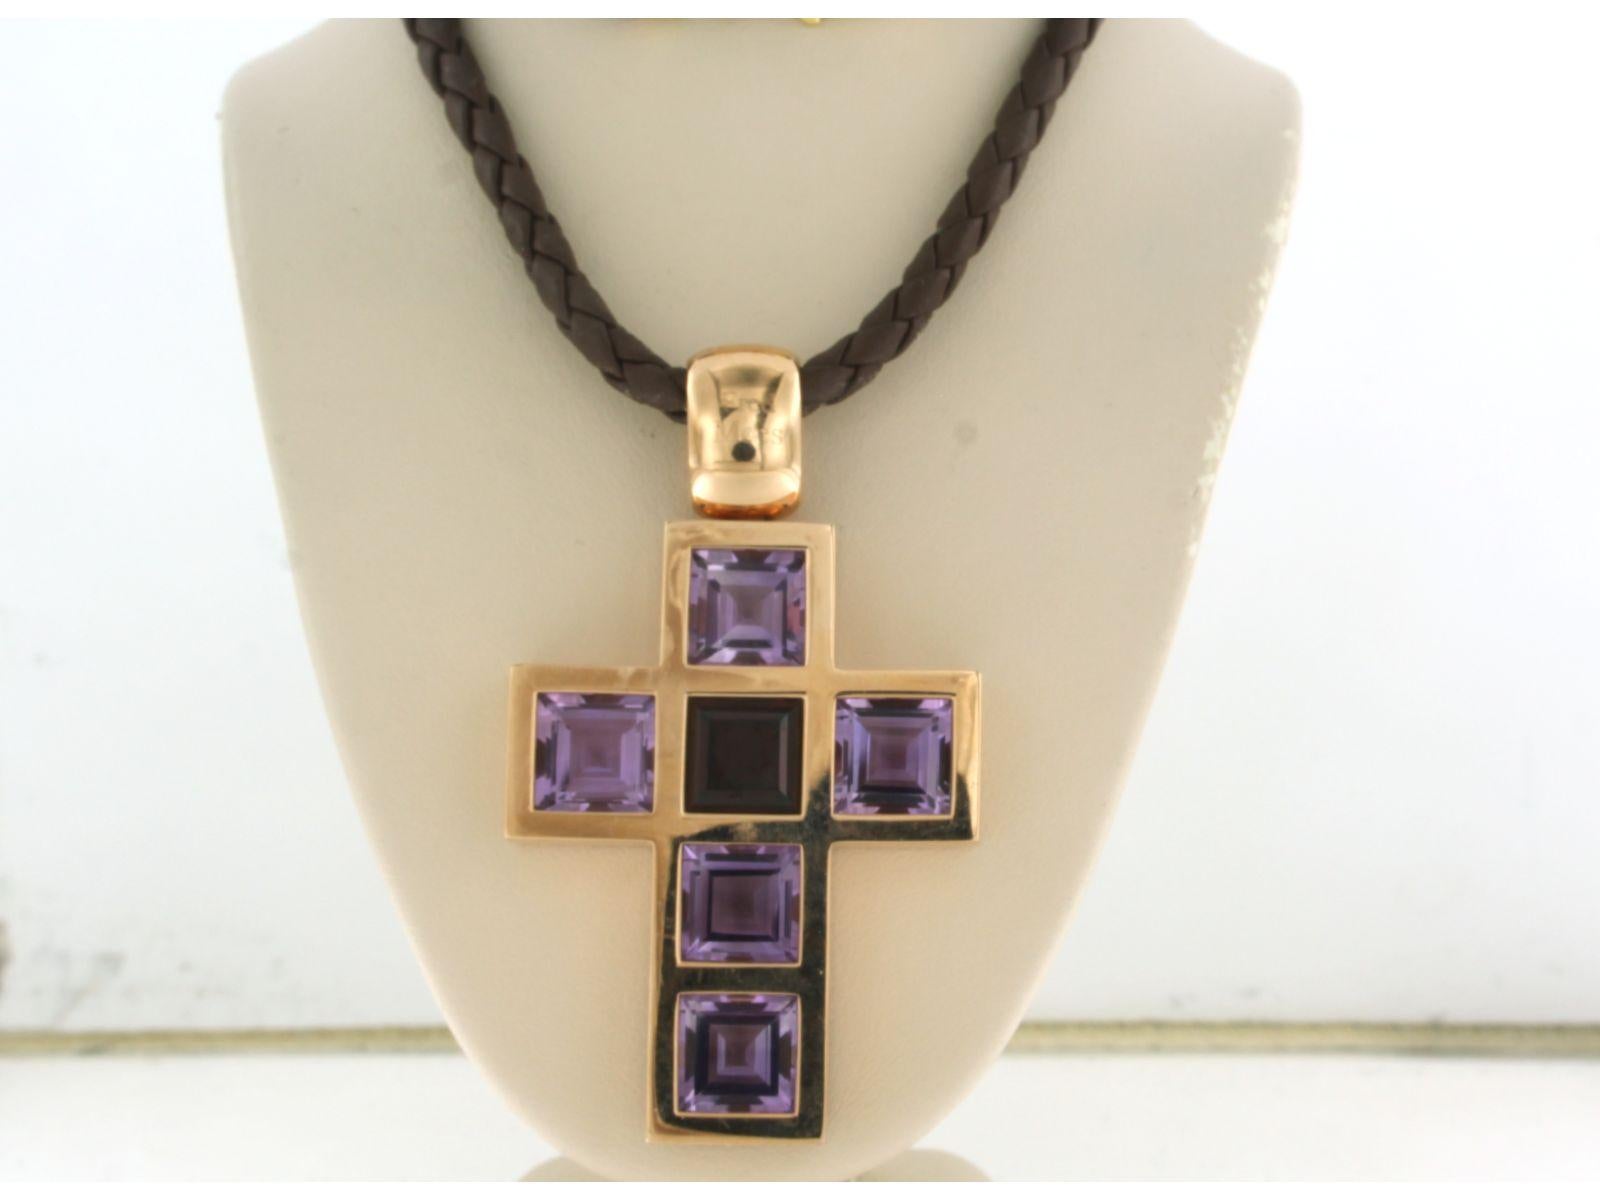 18 kt yellow gold lock on a braided brown leather necklace with a gold pendant by FRED MOES with amethyst and garnet - 45 cm long

Detailed description:

The necklace is 45 cm long and 3.7 mm wide

The pendant is 6.8 cm high and 4.0 cm wide, pendant